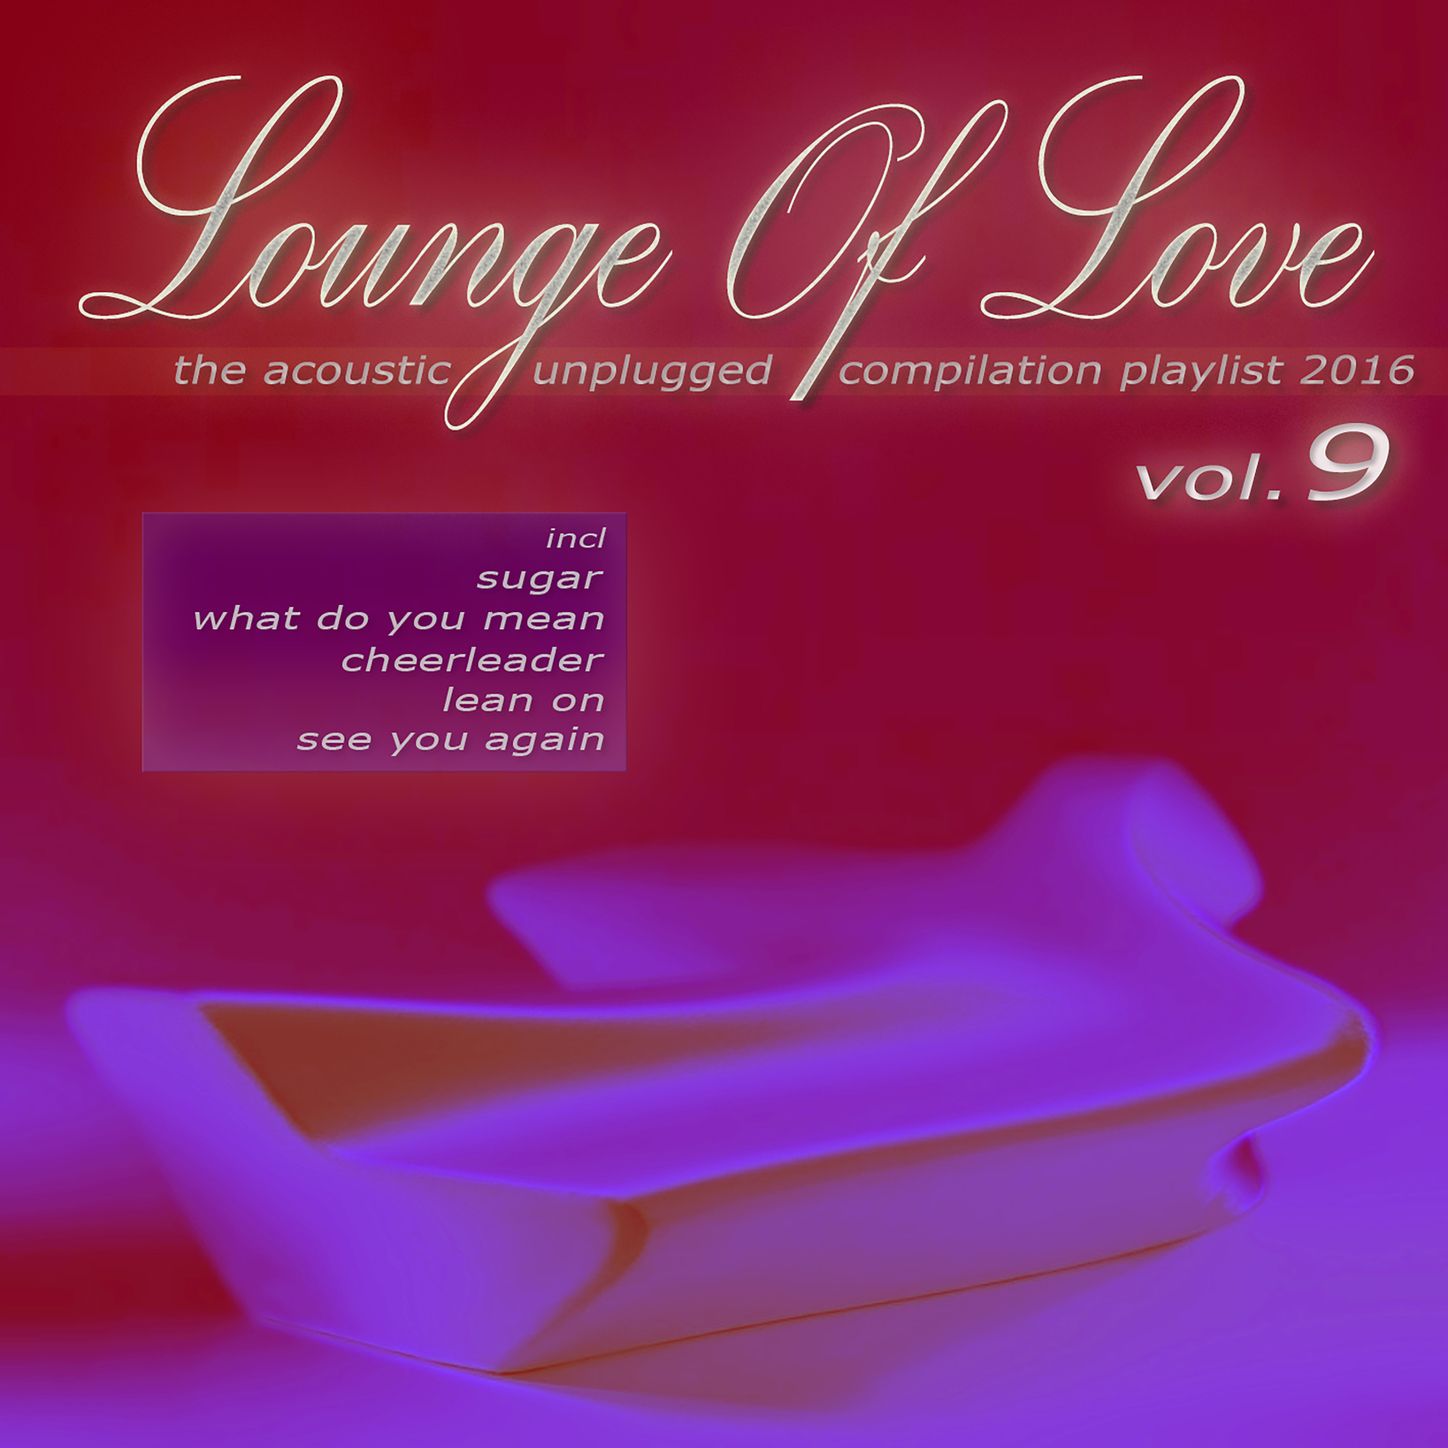 Heaven (Ingredients of Lounge Mix)